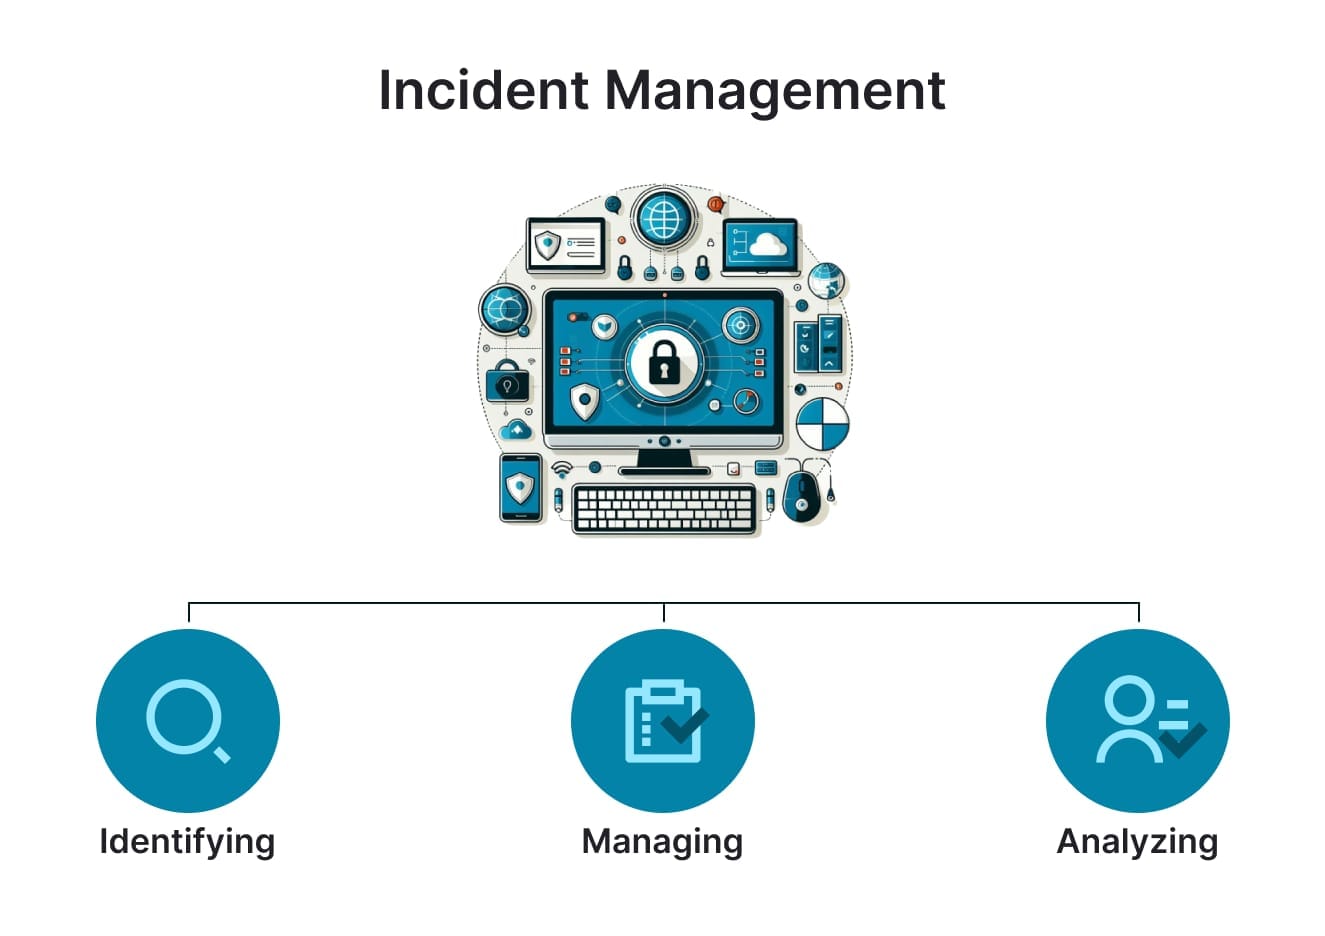 Handling Tool Sprawl and Miscommunications in Incident Management: Getting Through the Chaos